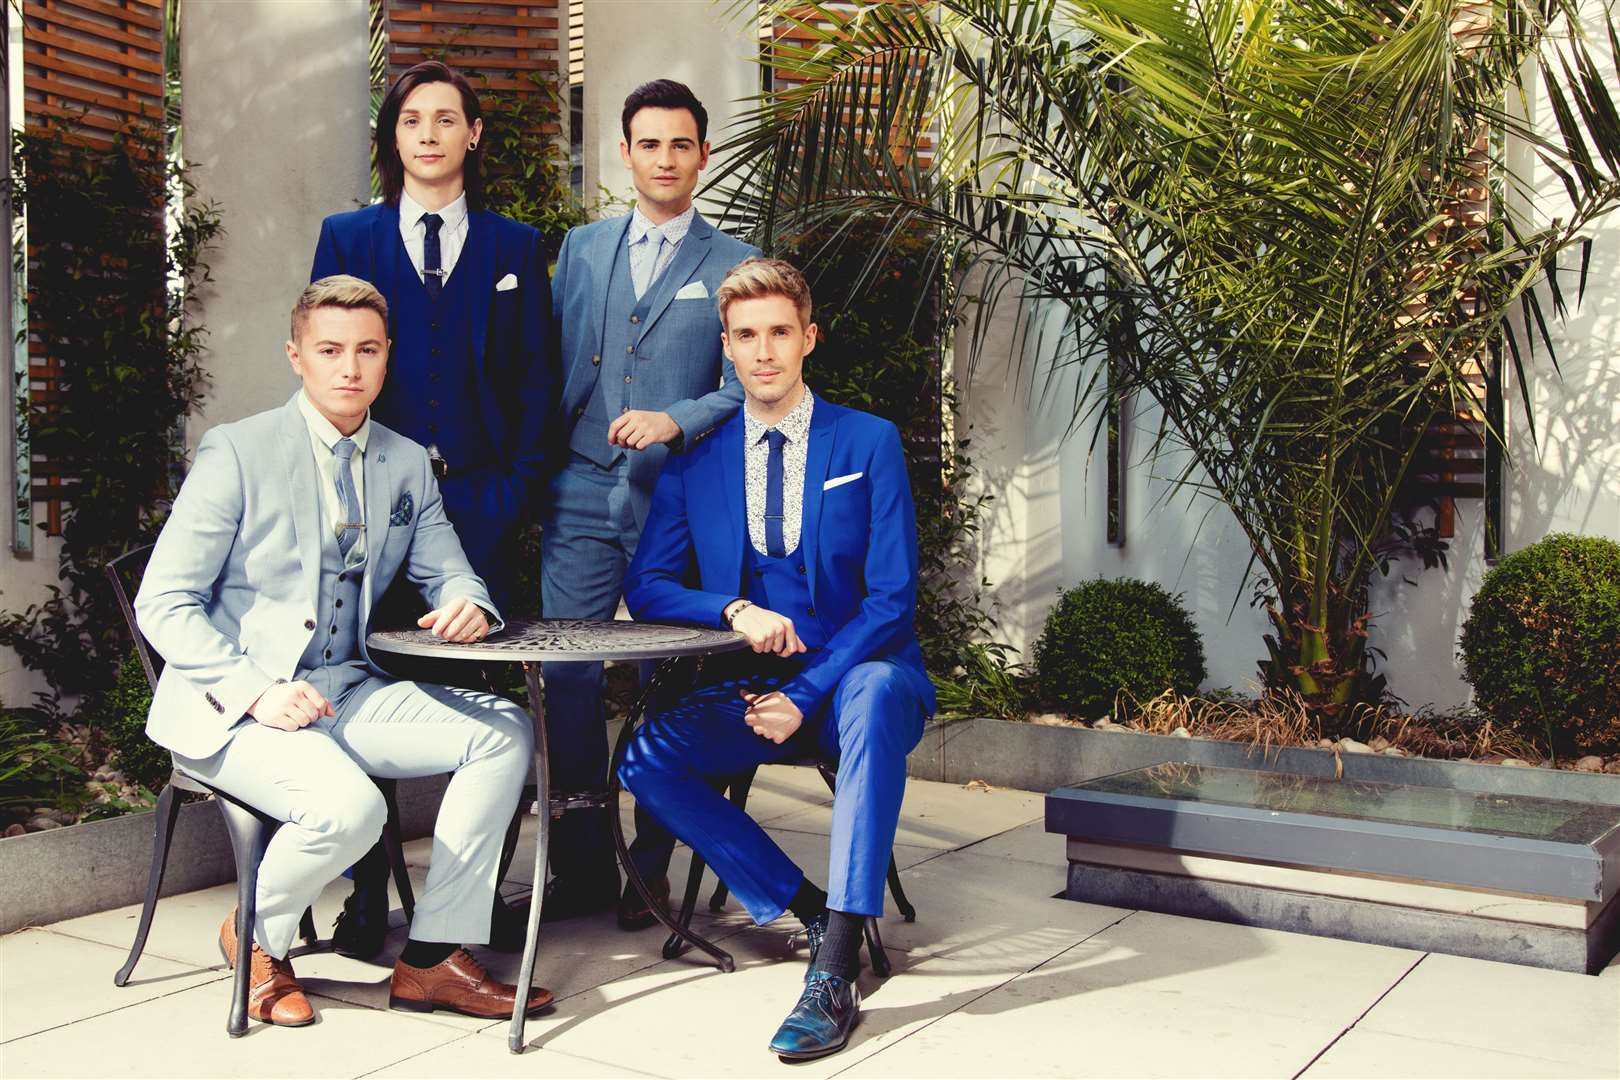 Collabro shot to fame after appearing on Britain's Got Talent. Picture: Medway Council